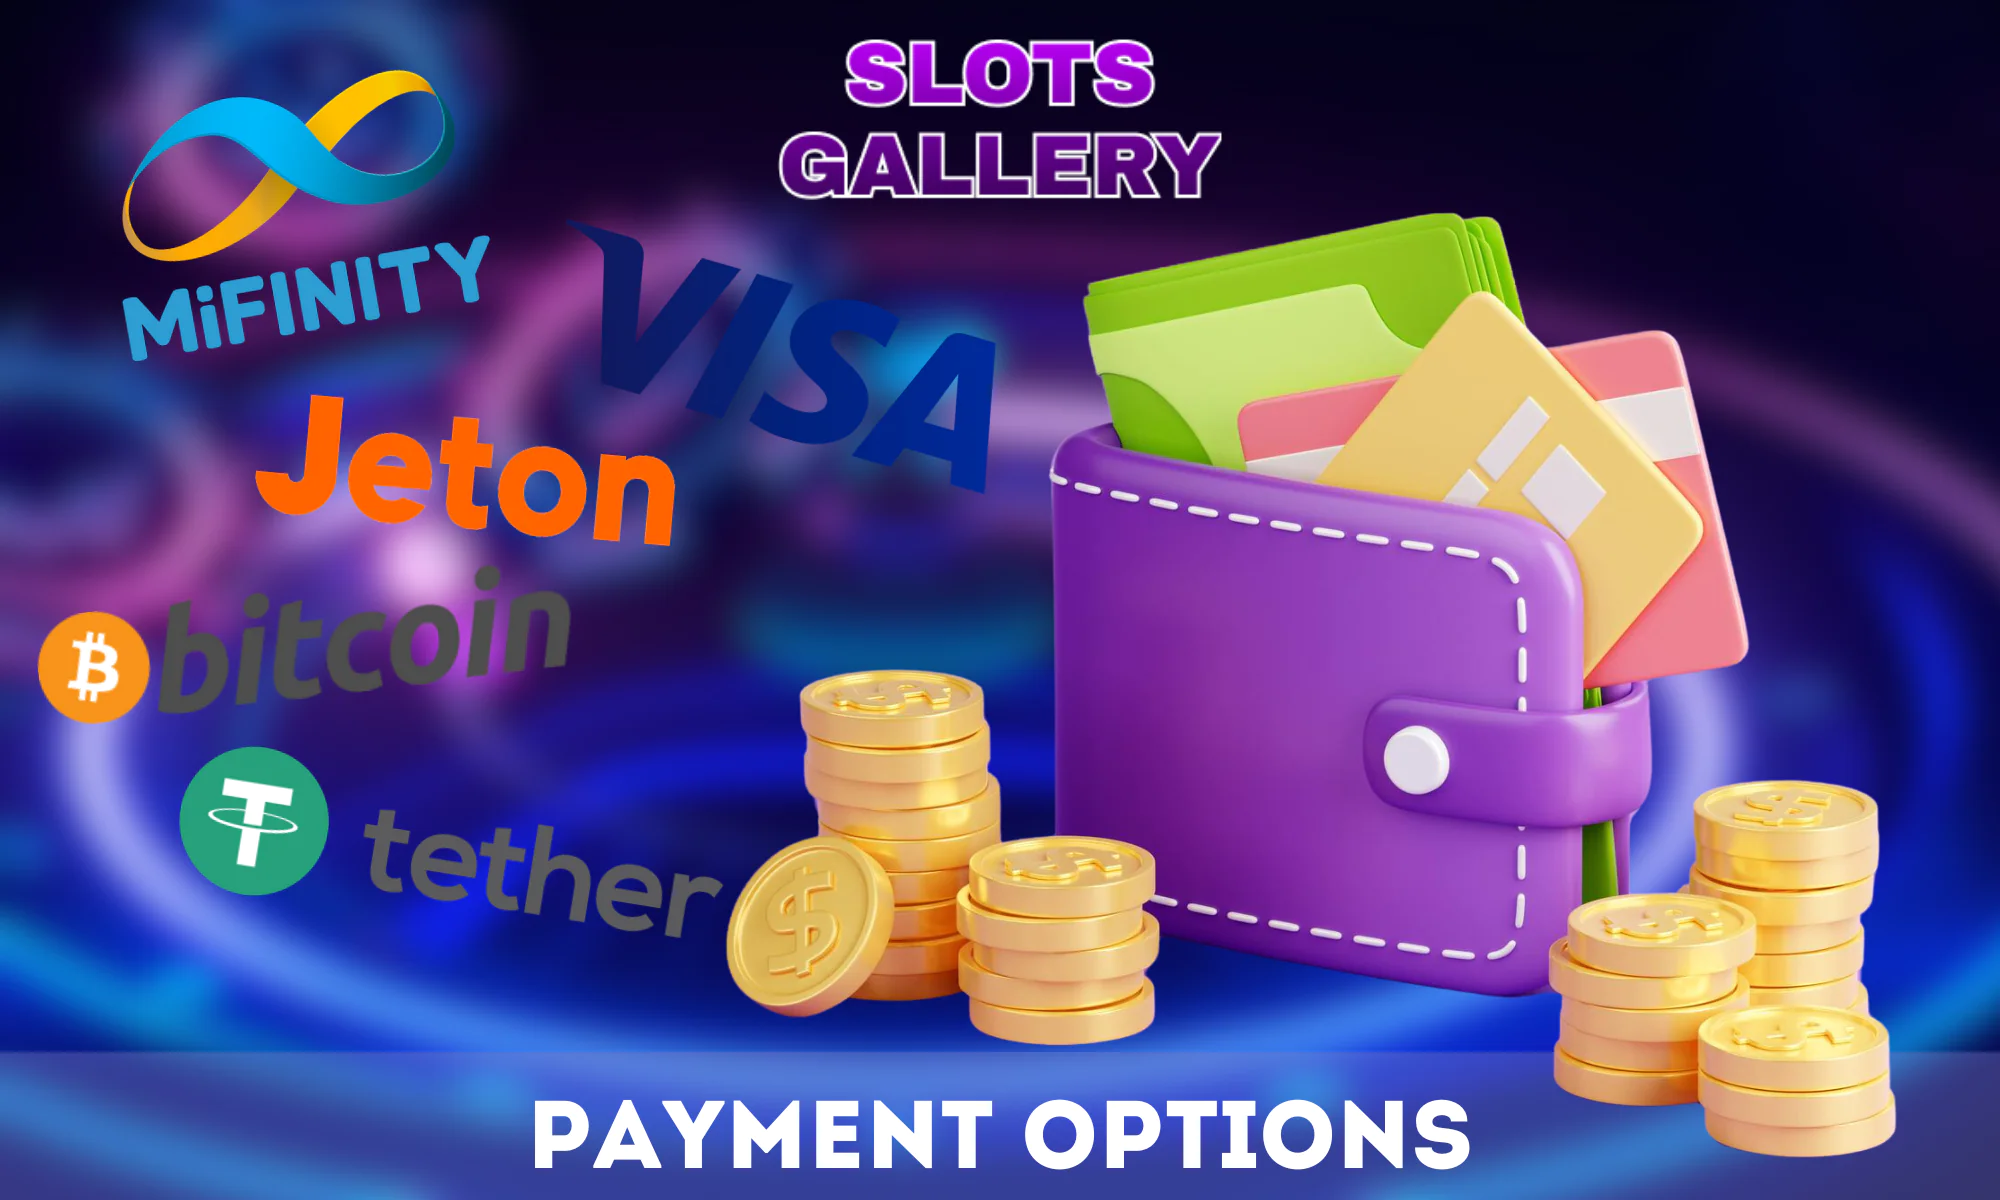 Slots Gallery Casino offers different payment methods